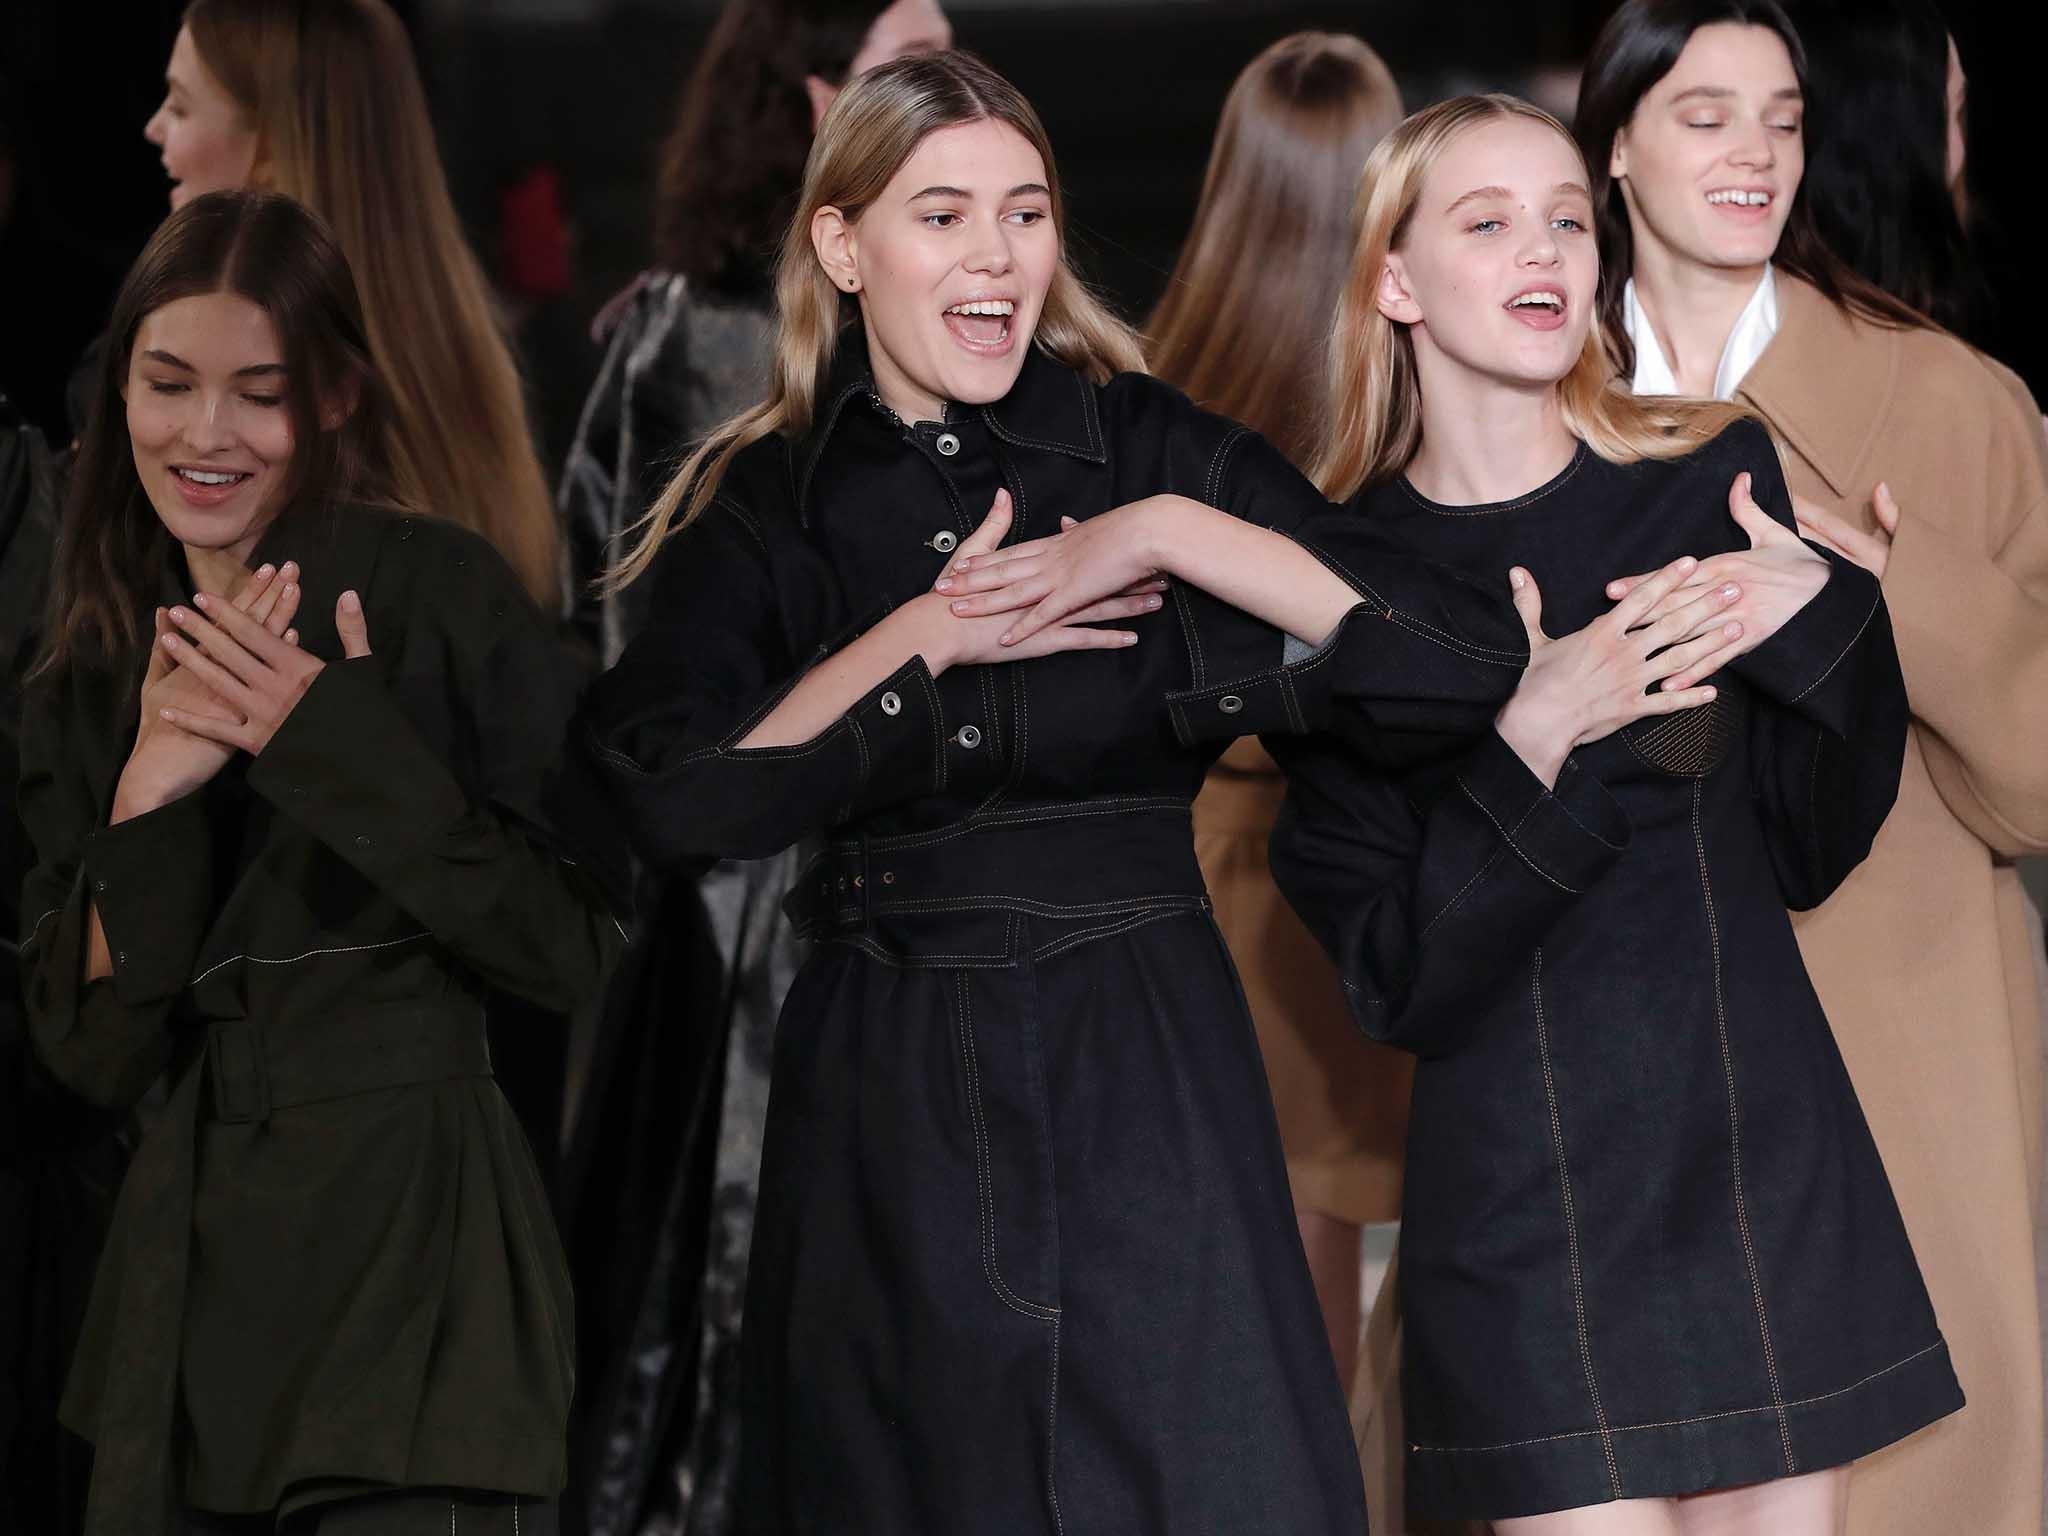 Stella McCartney closed her autumn/winter show at Paris Fashion Week with a heart-warming tribute to George Michael